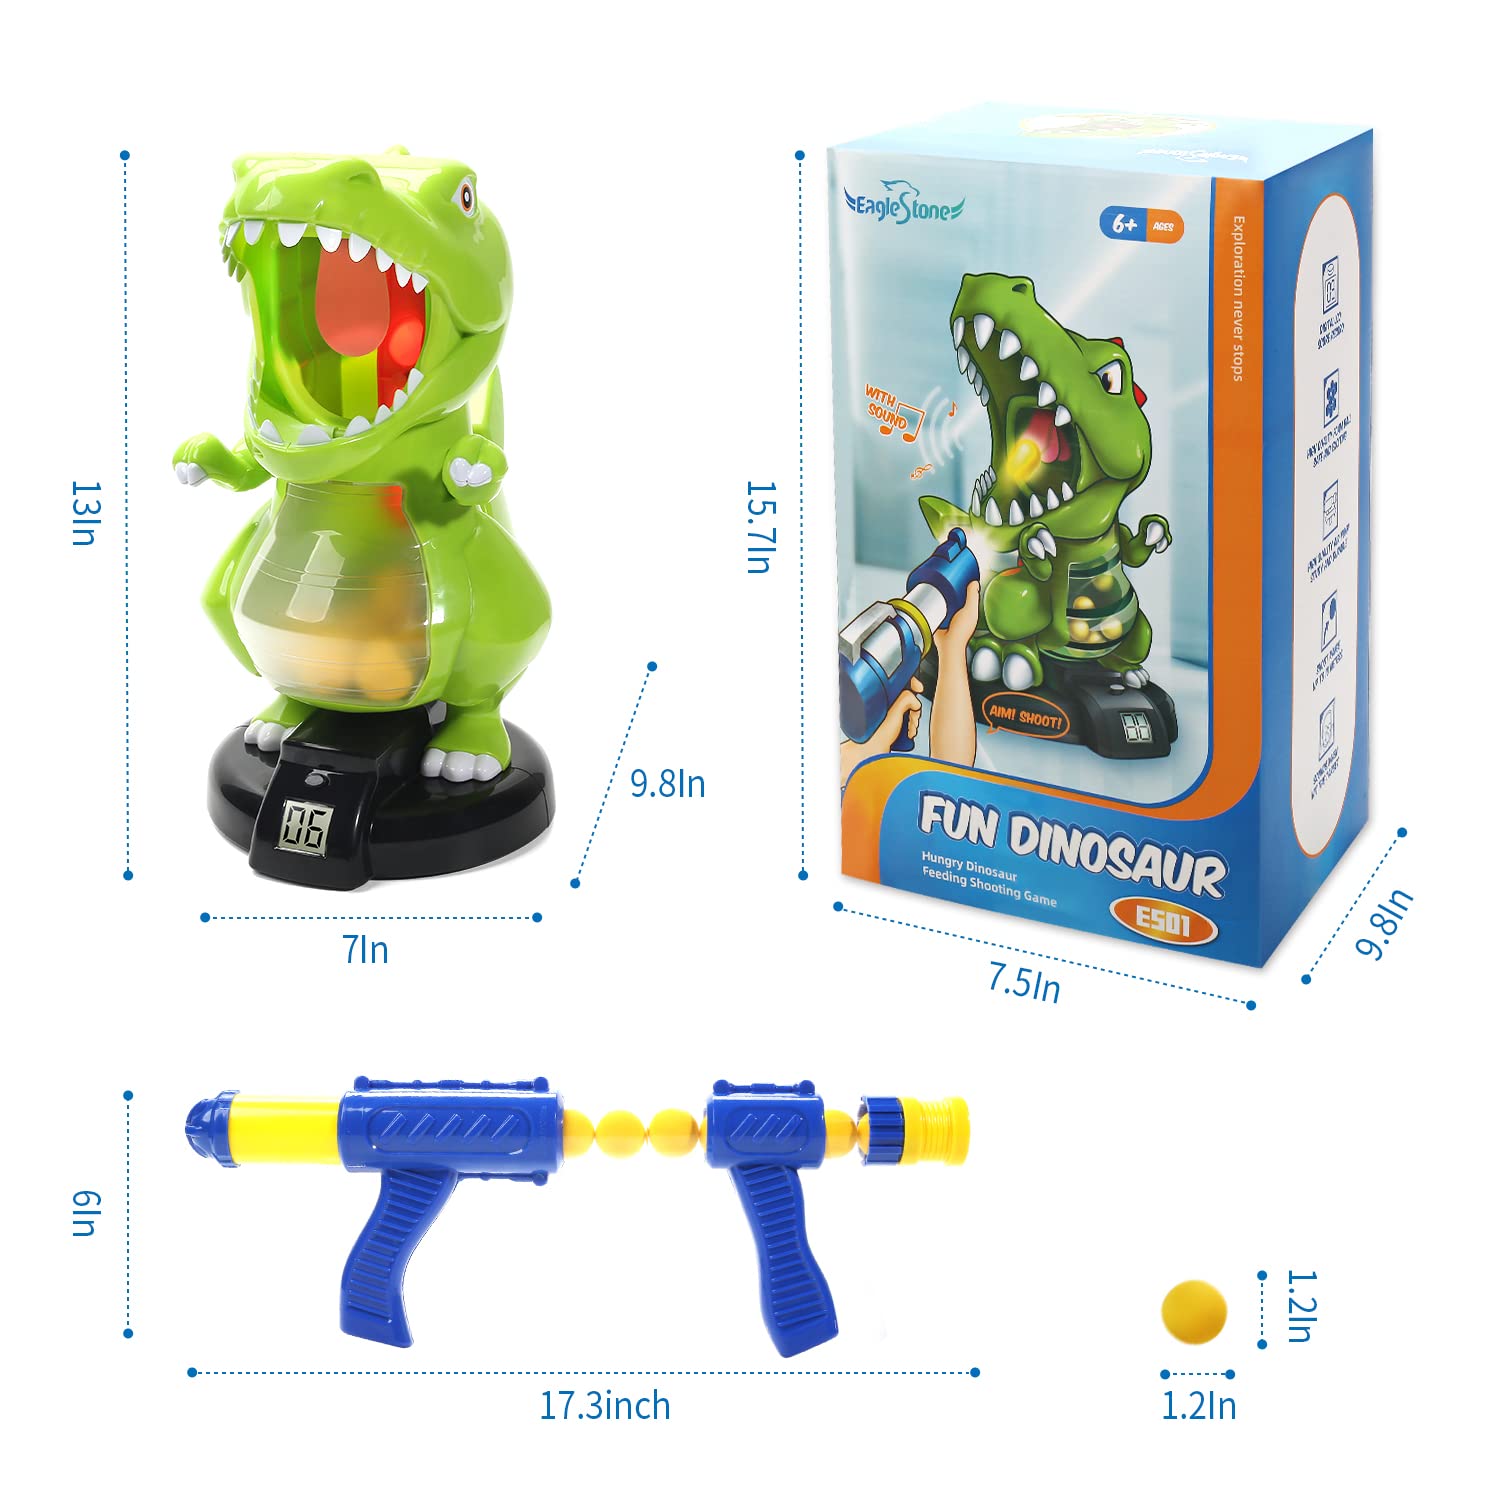 EagleStone Dinosaur Shooting Toys for Boys, Kids Target Shooting Games w/ Air Pump Gun Birthday Party Supplies & LCD Score Record, Sound, 24 Foam Balls Electronic Target Practice Gift for Toddlers